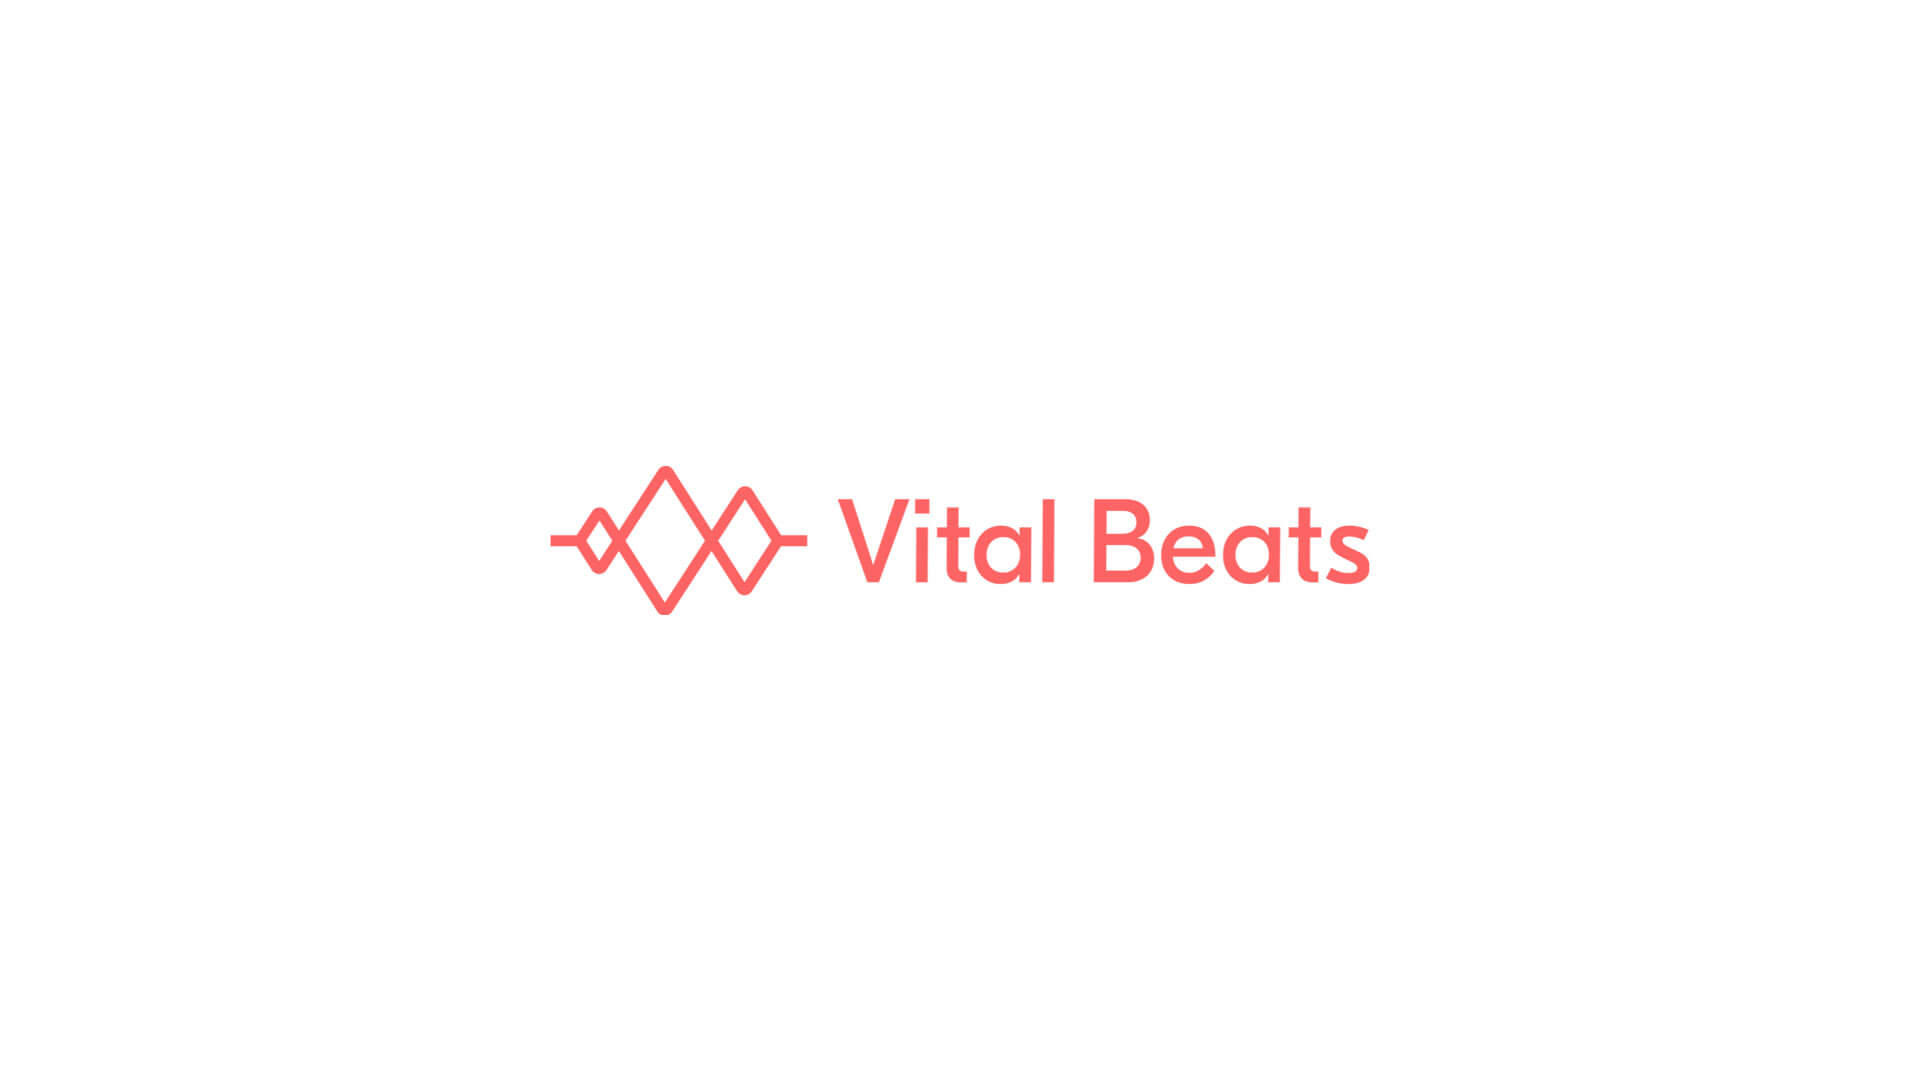 When we made an explainer video for Vital Beats!